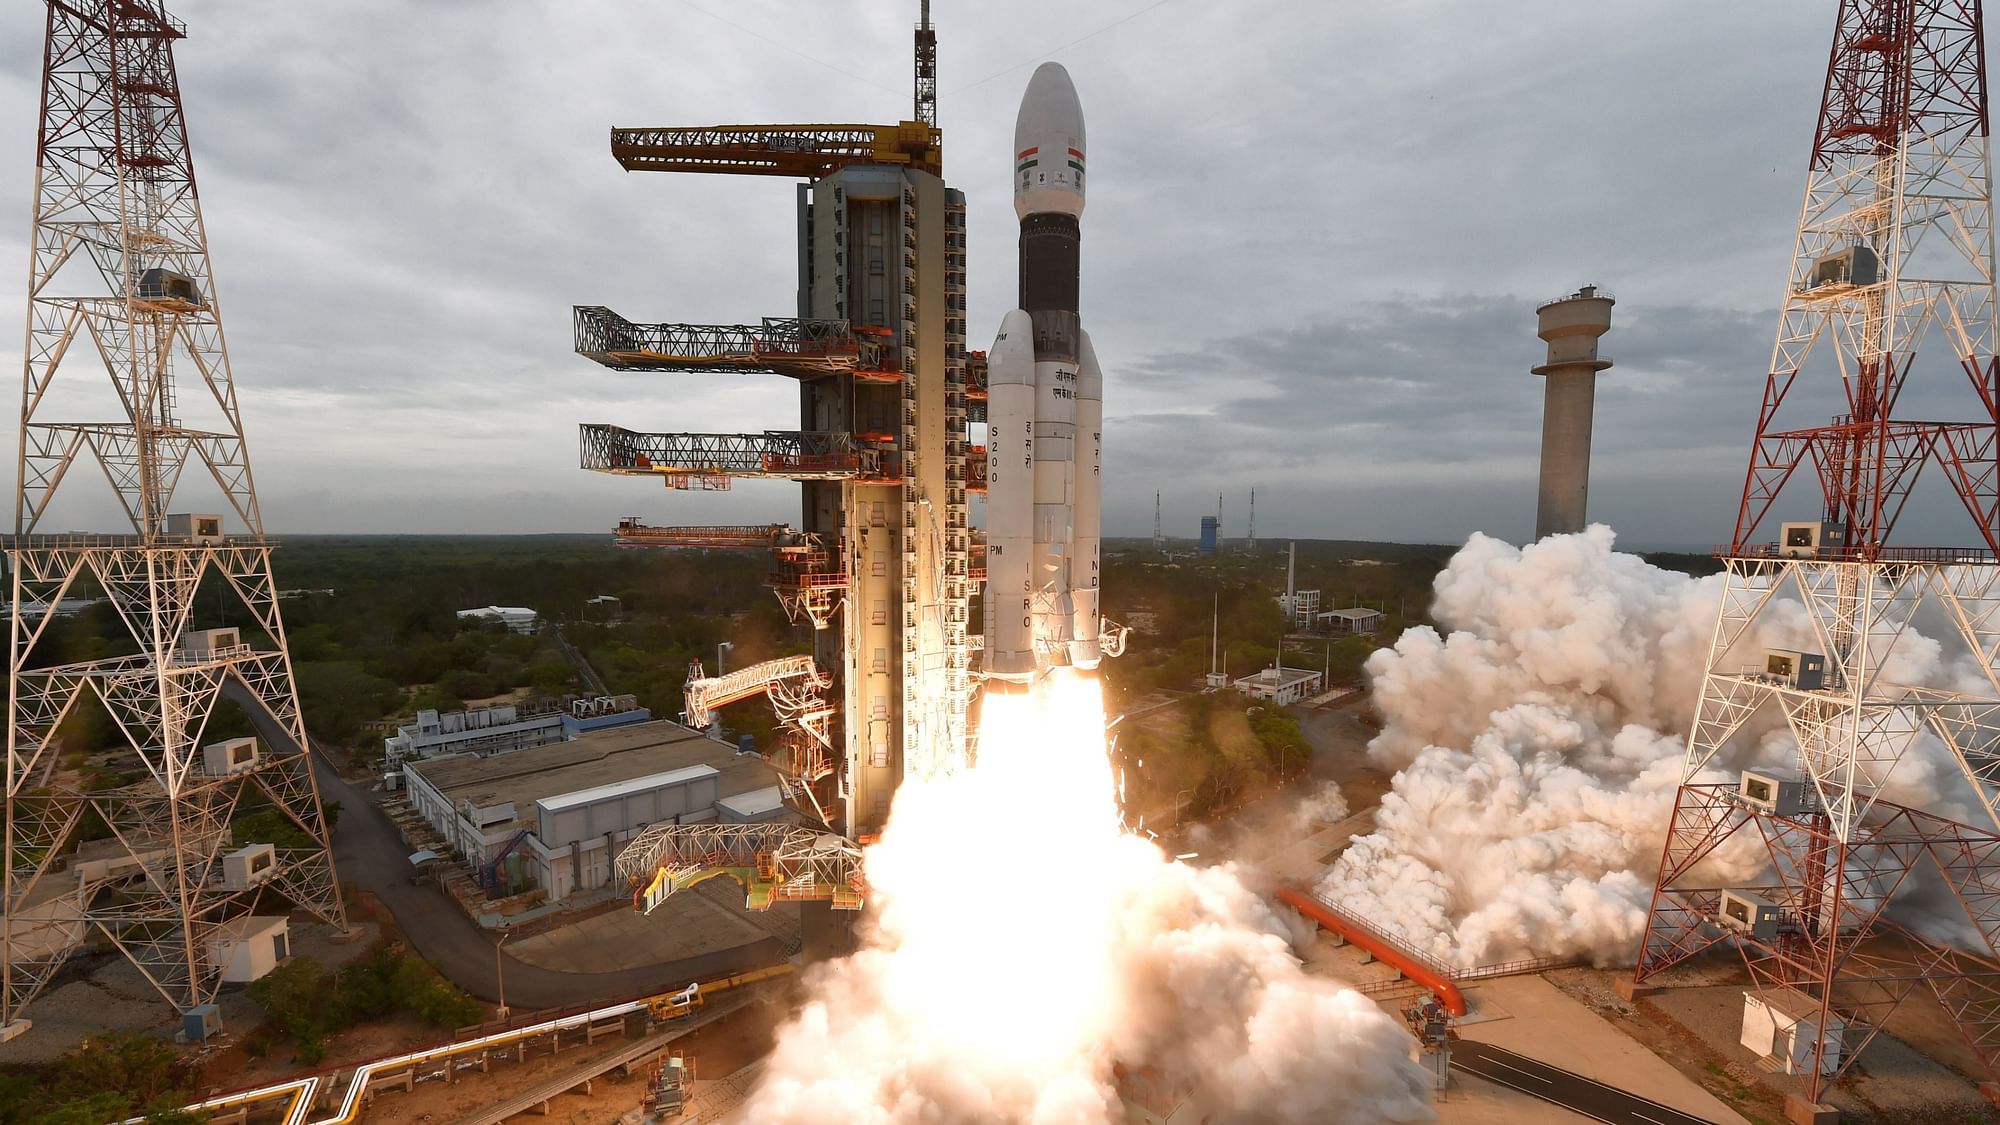 The GSLV Mk-III rocket lifts off from the Satish Dhawan Space Station in Sriharikota.